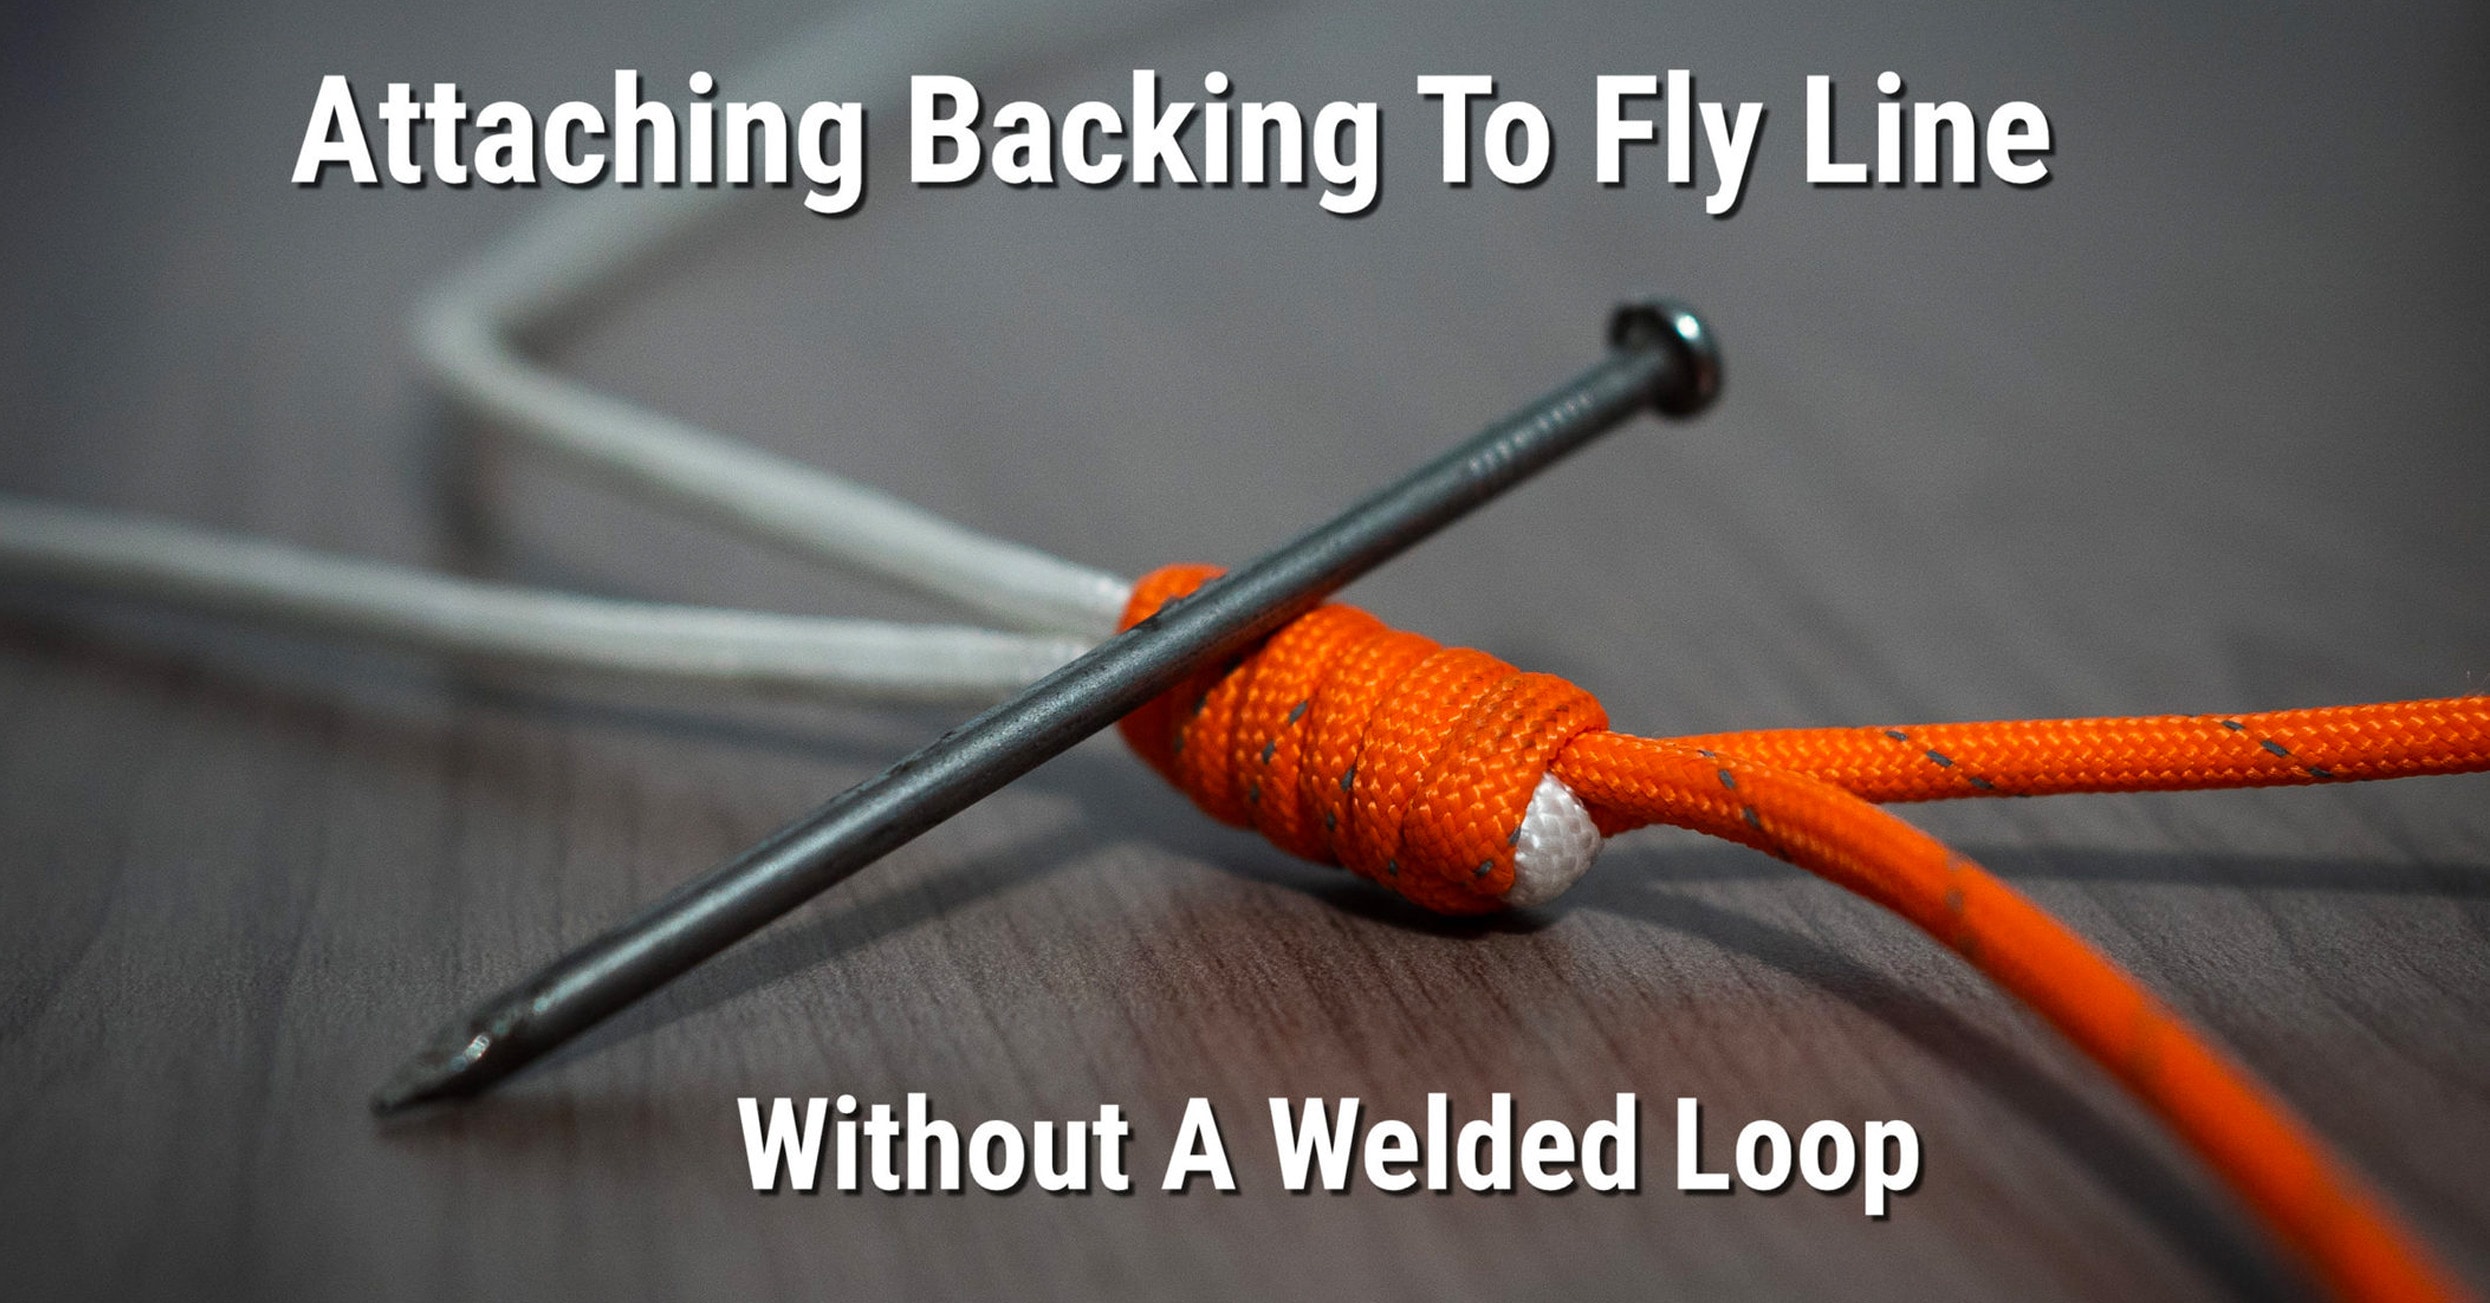 Attaching Backing To Fly Line Without A Welded Loop, The Albright knot